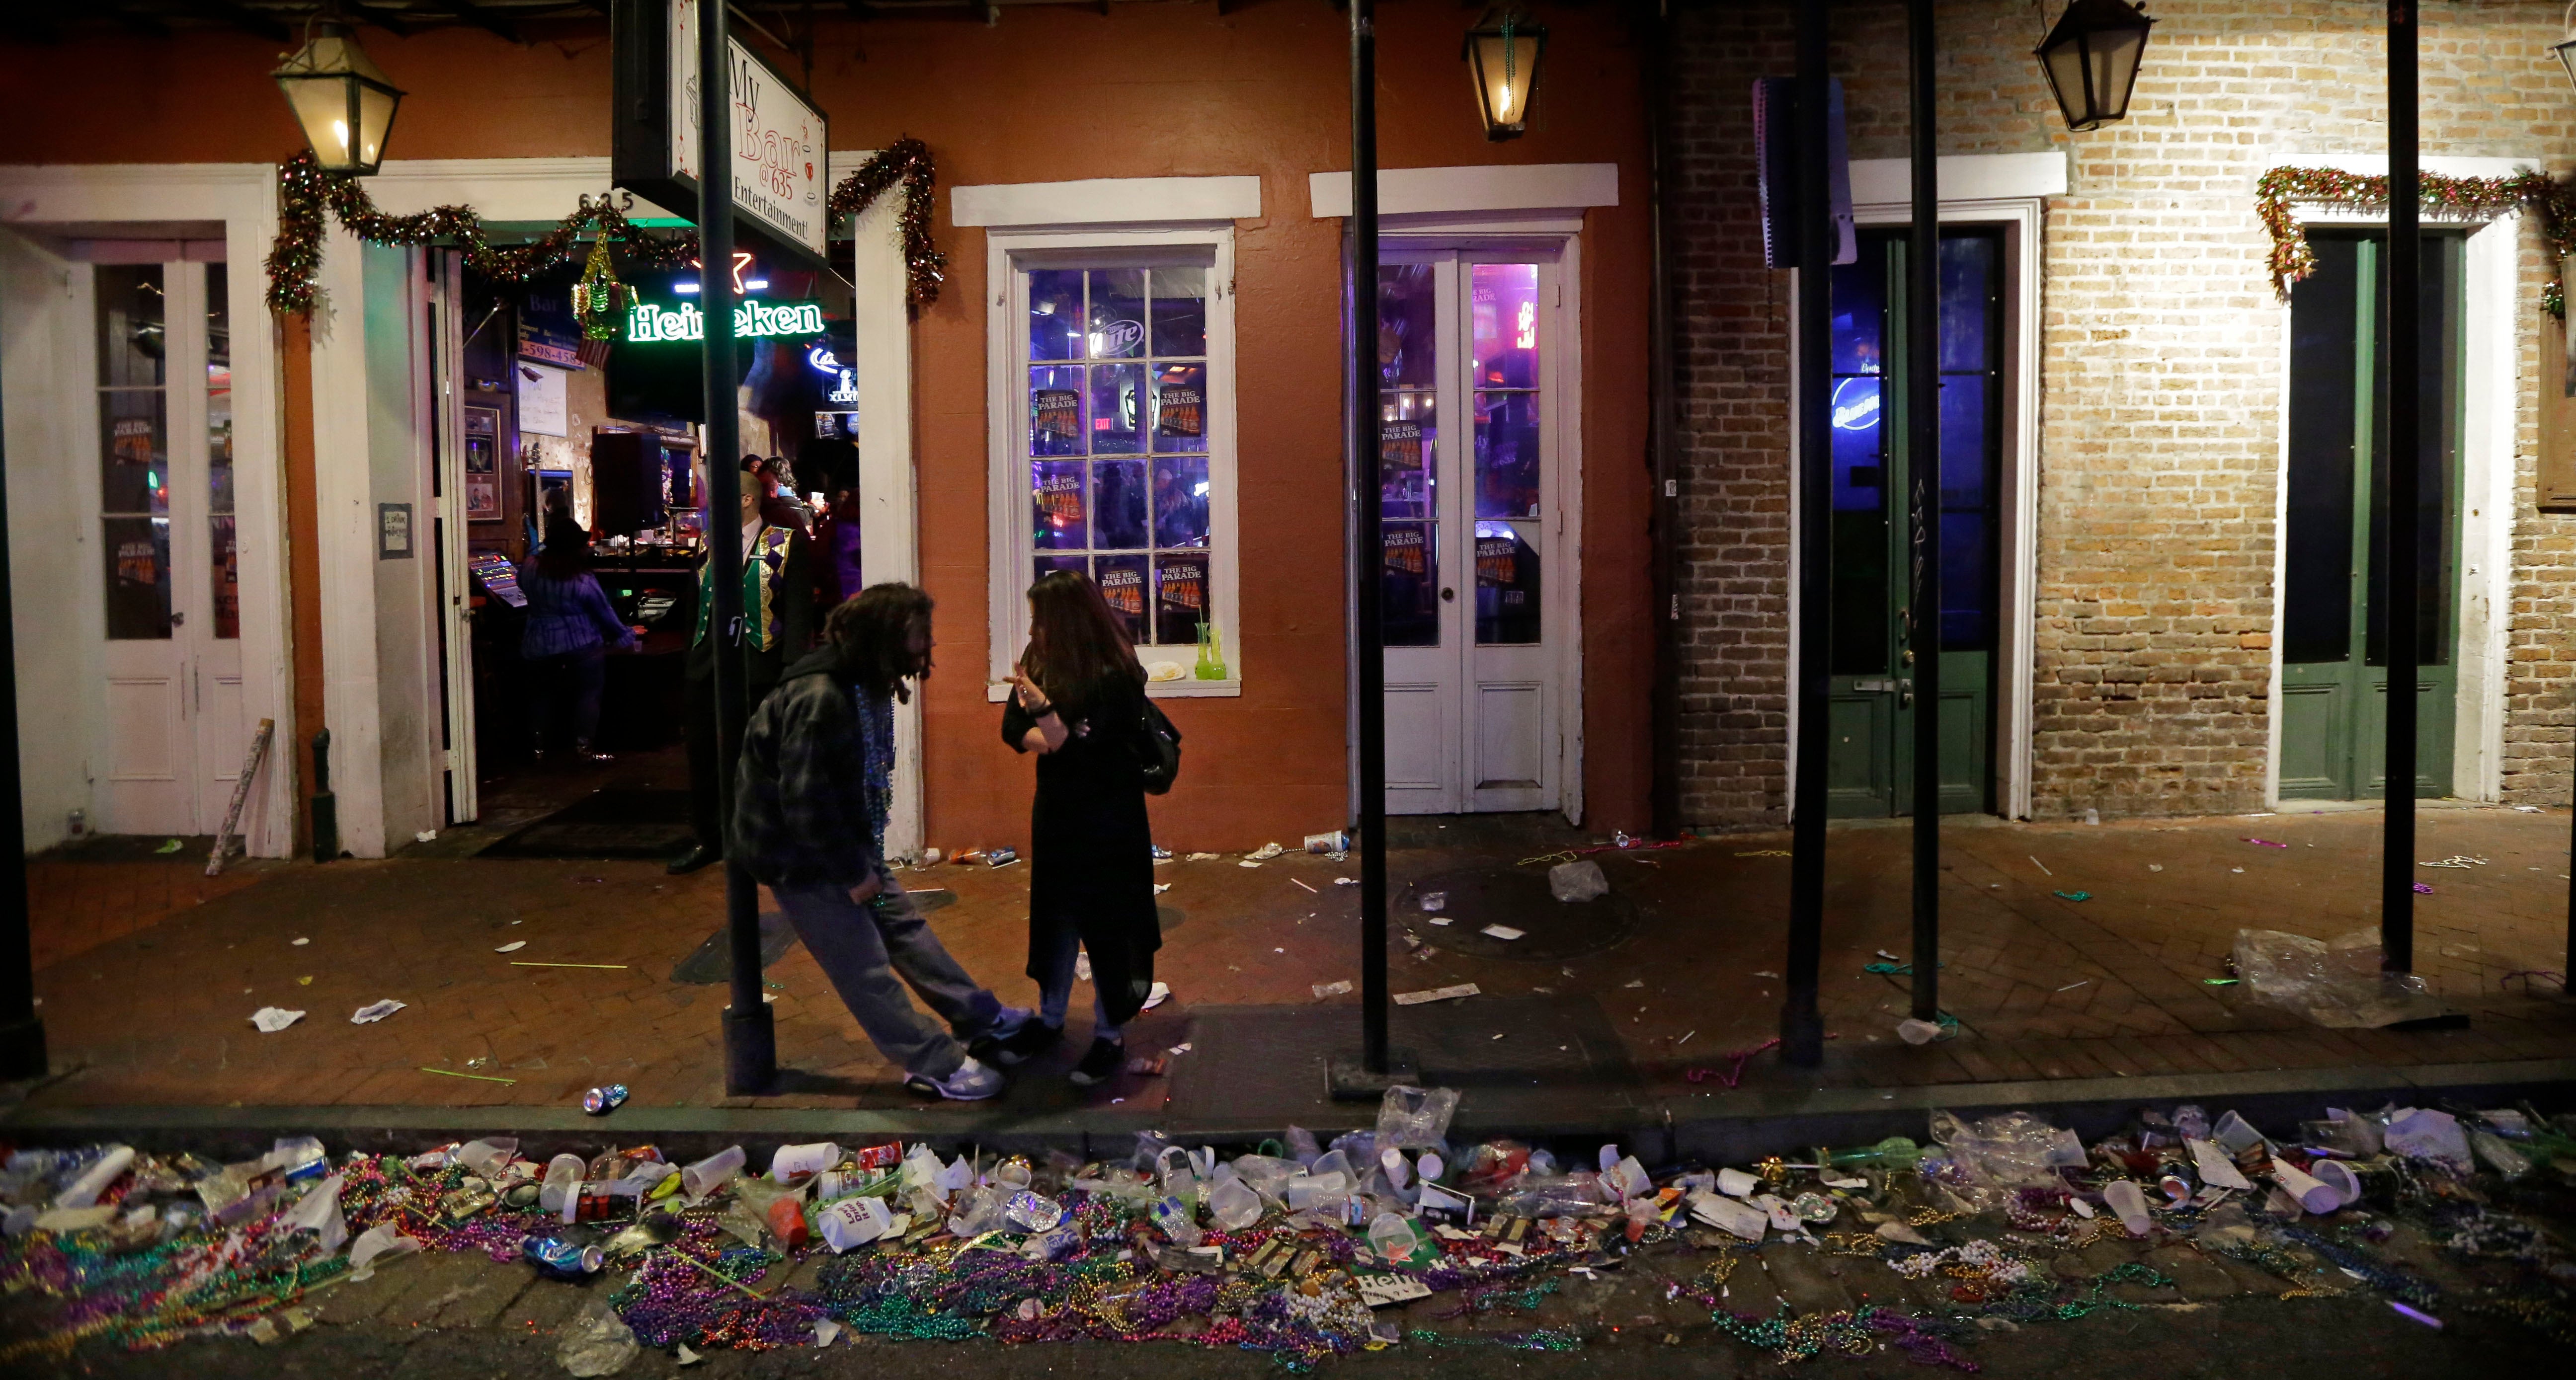 Trash lines the gutter on Bourbon Street, in the early hours of the morning after Mardi Gras, in New Orleans, Feb. 18, 2015